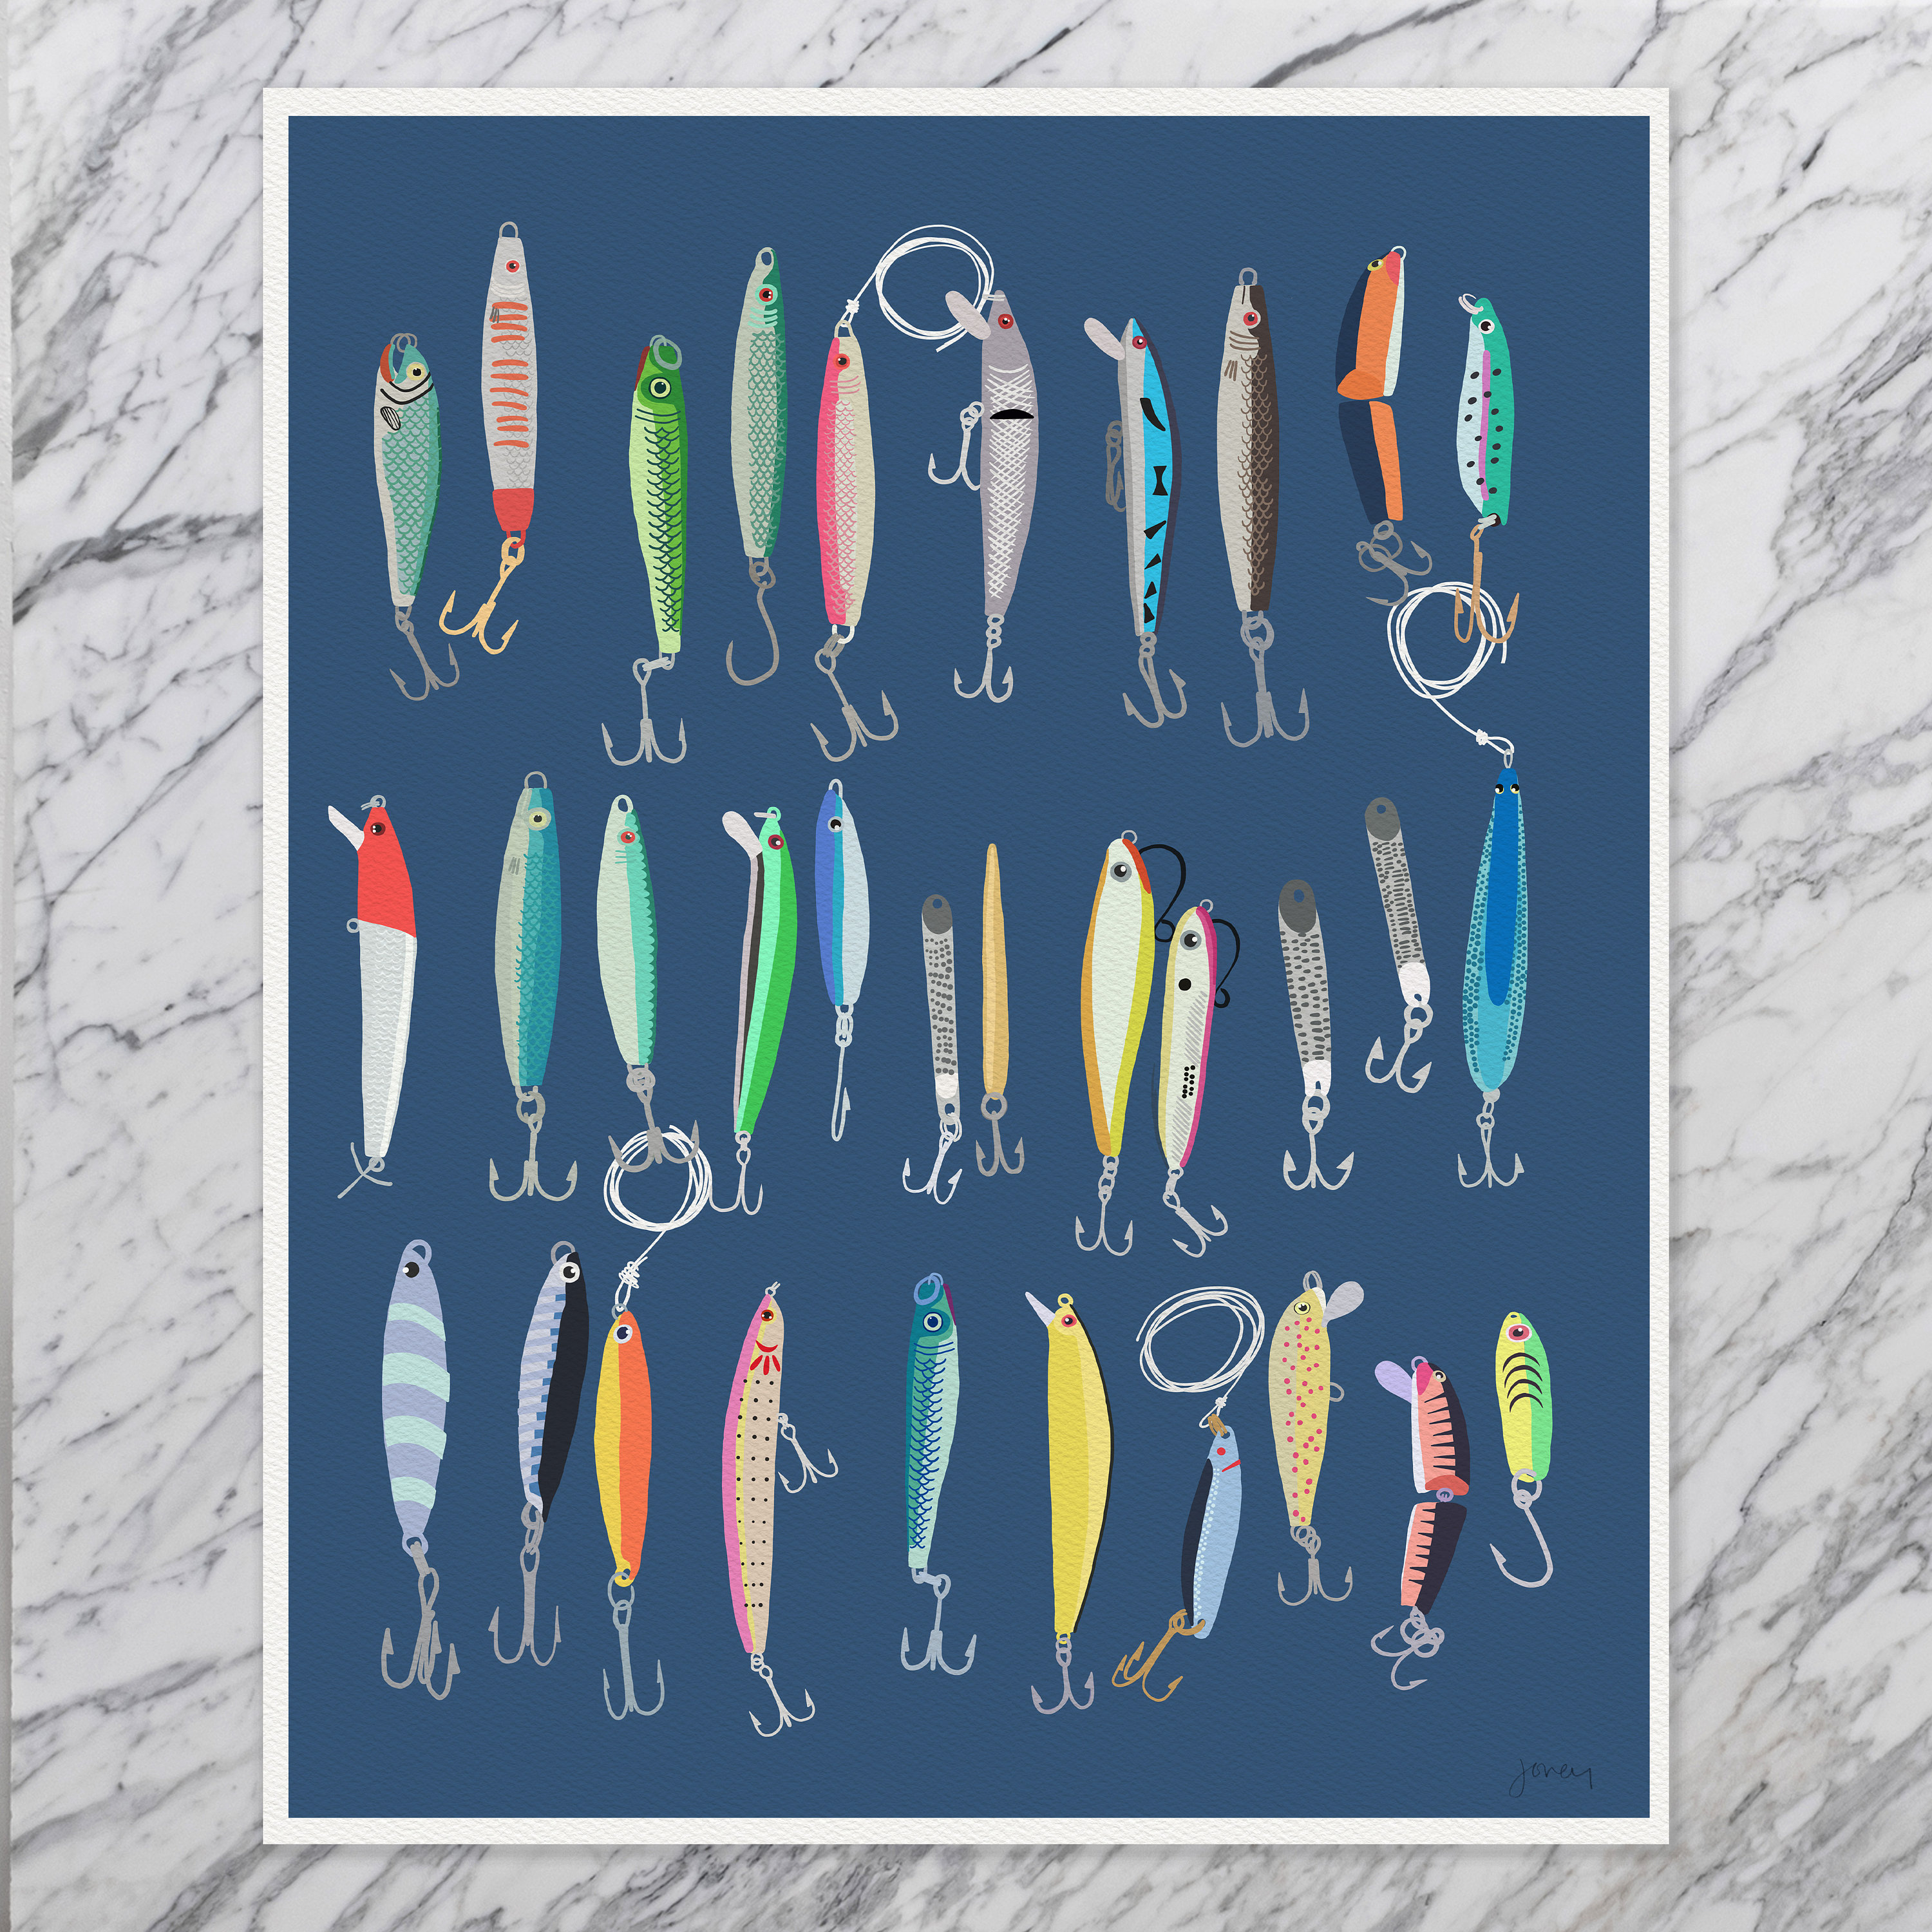 Saltwater Fishing Lures Art Print Signed and Printed by the Artist